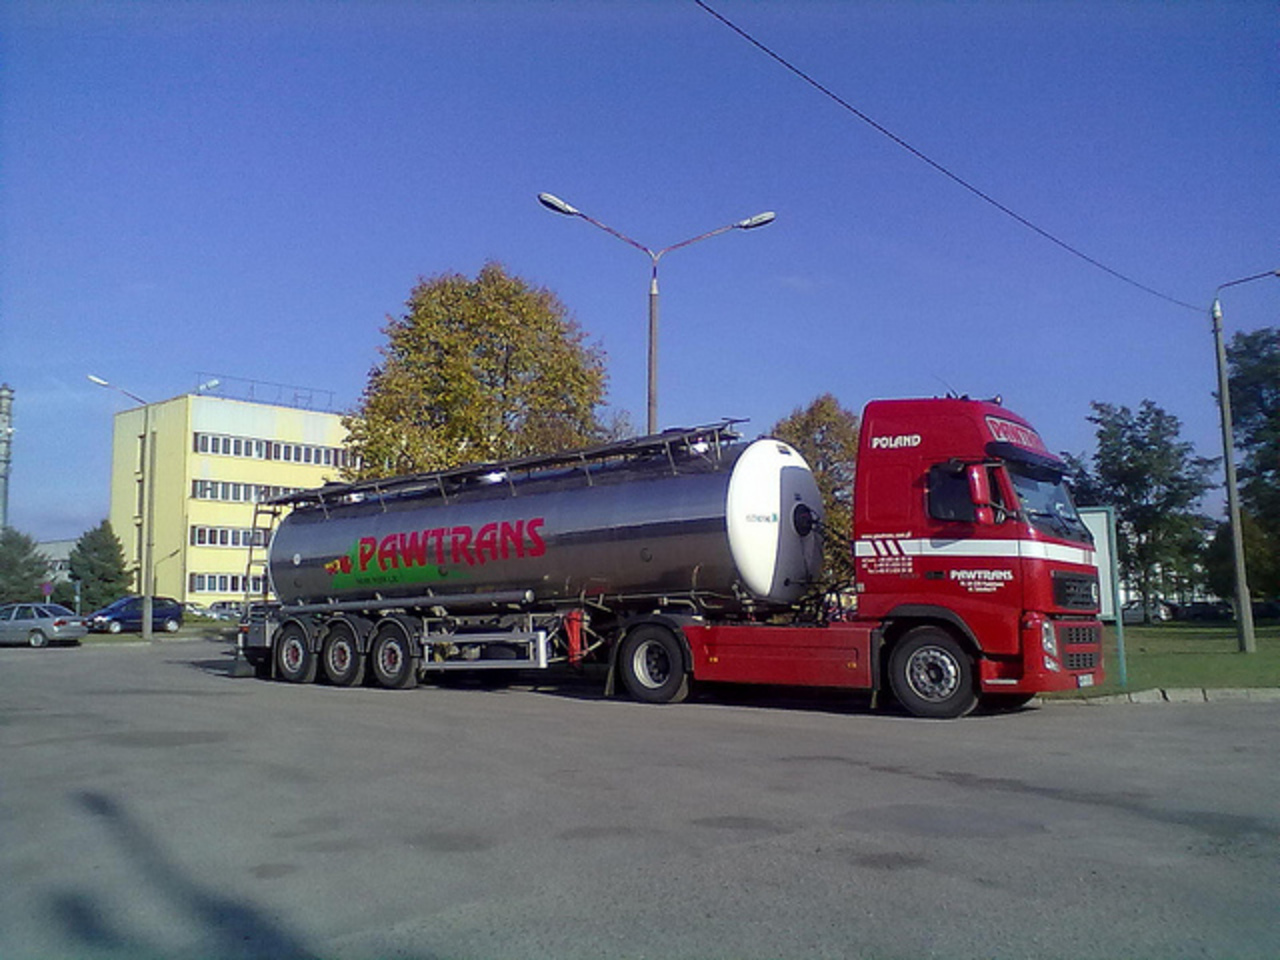 4S VOLVO FH12 500 Tanker PAWTRANS PL | Flickr - Photo Sharing!